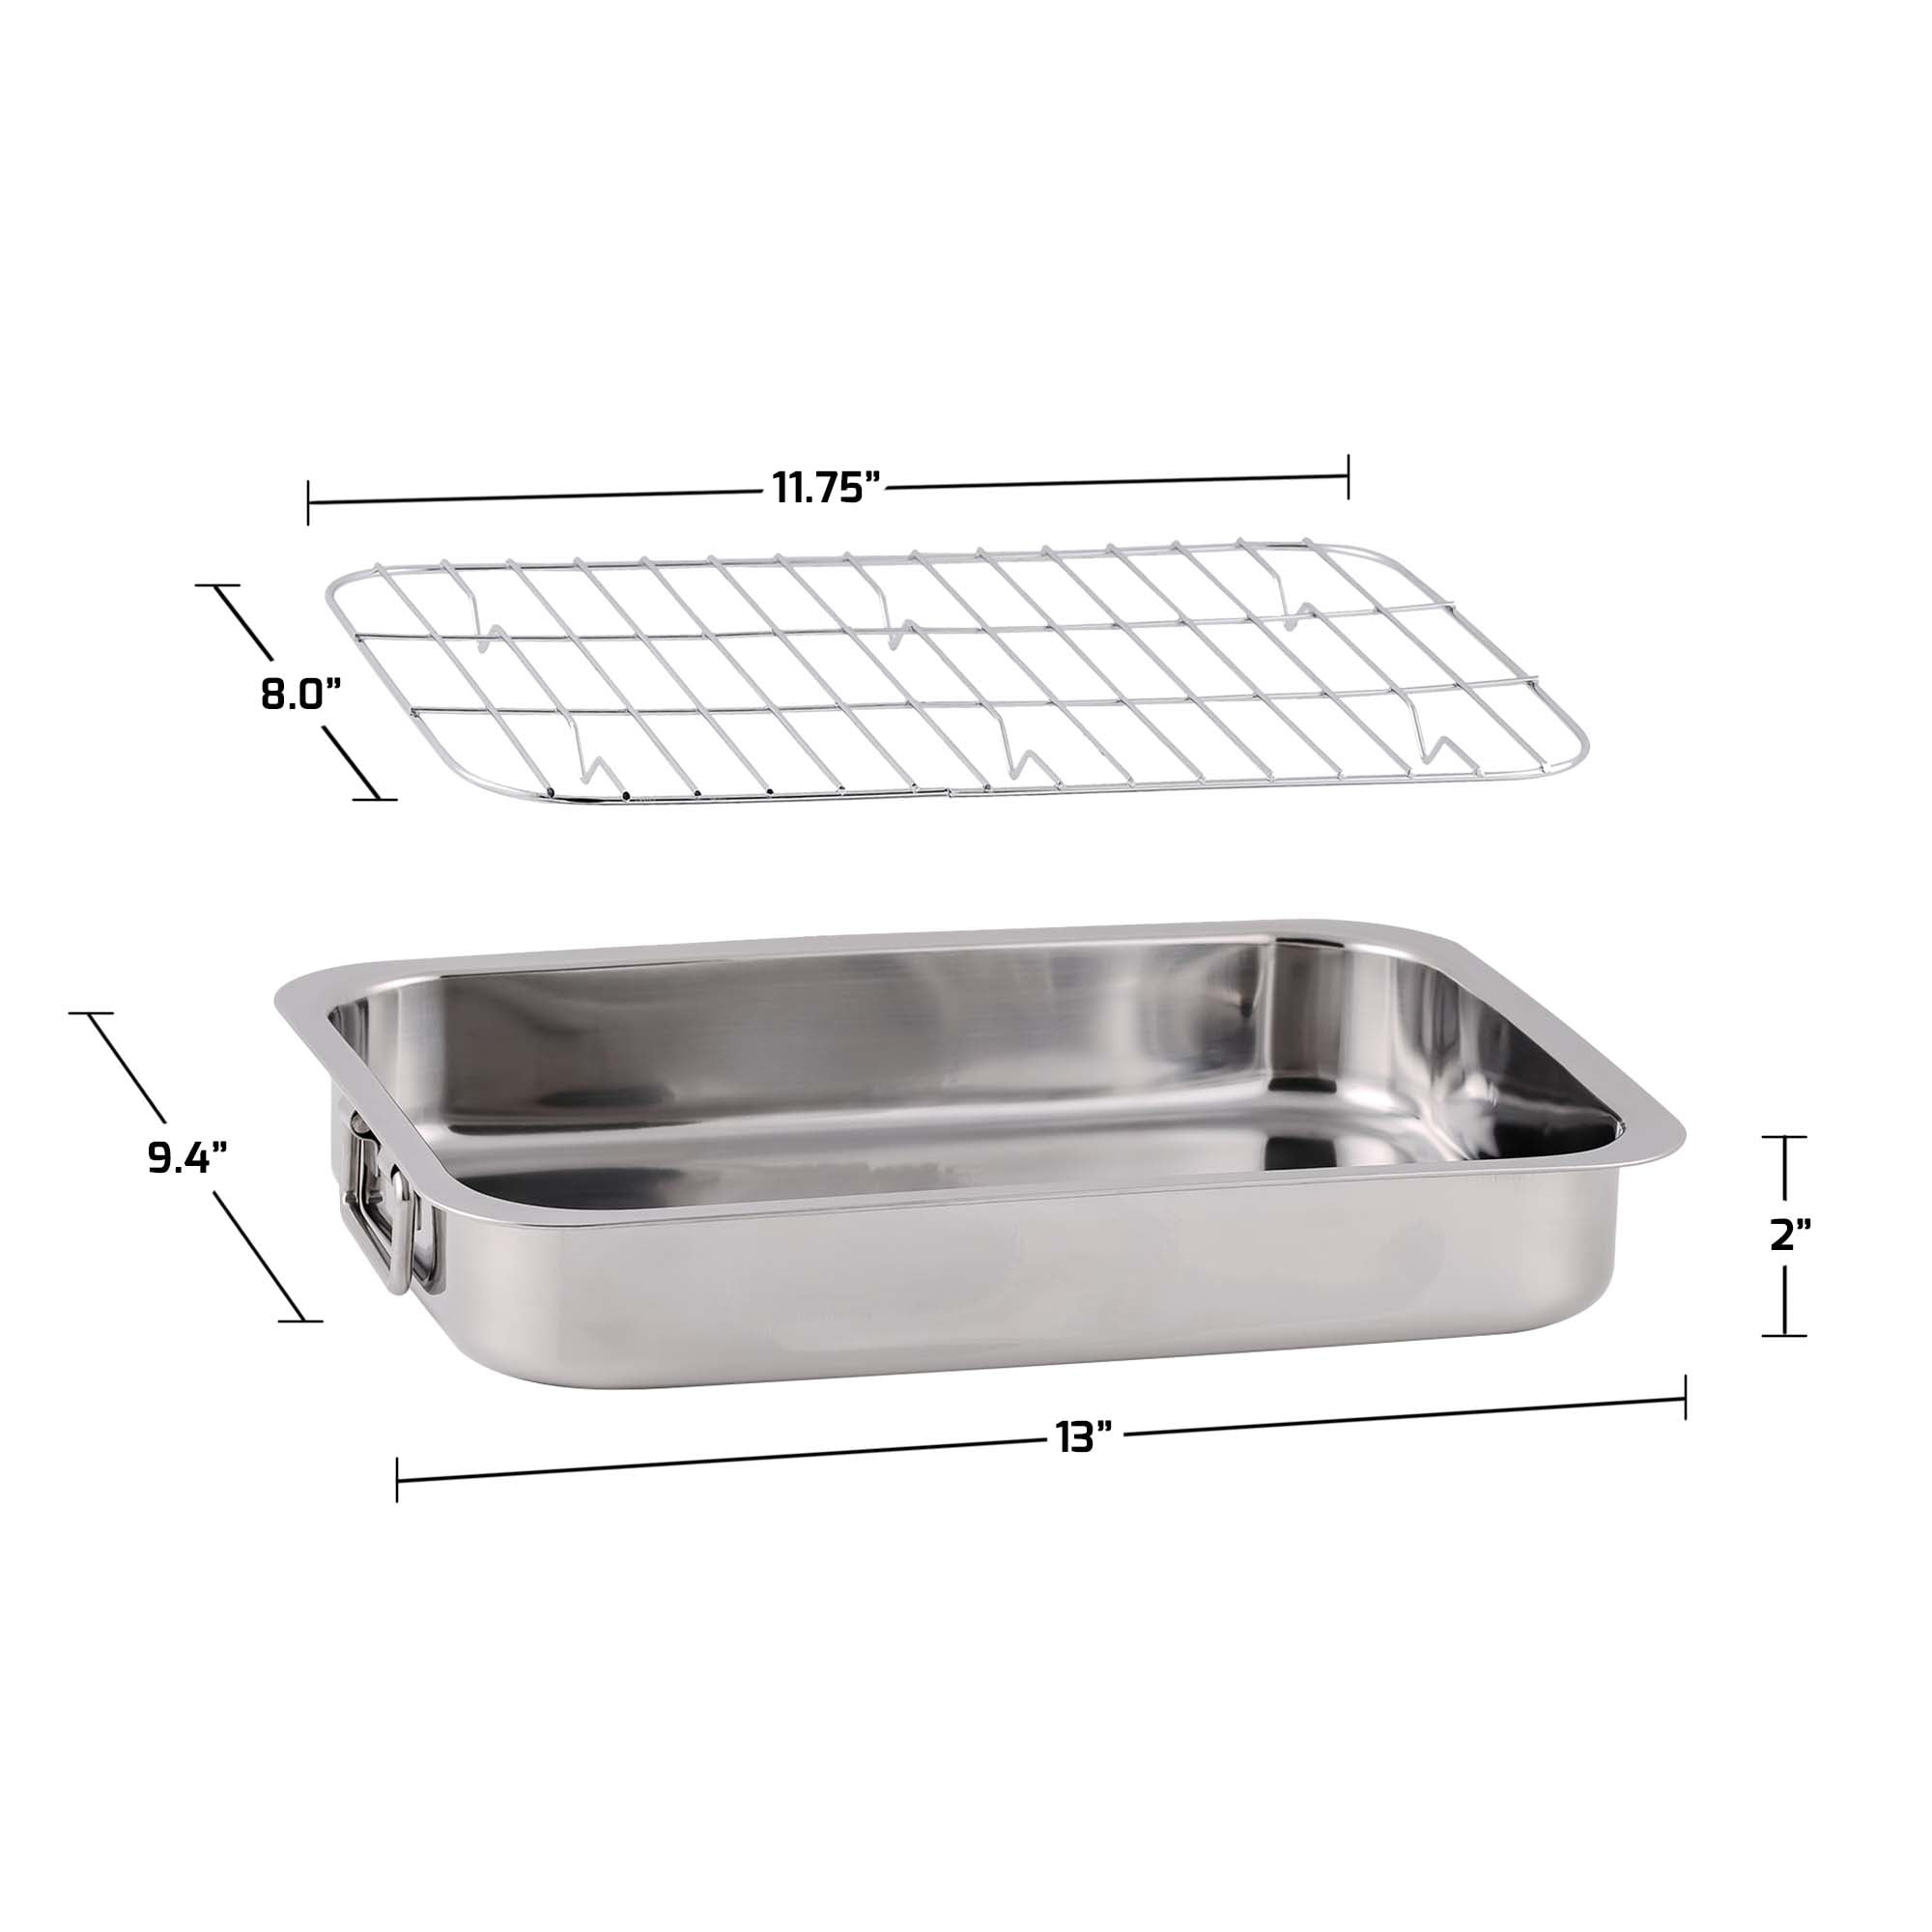 Classic Cuisine 5.3 qt. Carbon Steel Non-Stick Roasting Pan with Removable Wire  Rack and 8 in. Electric Carving Knife SH-BUND181 - The Home Depot